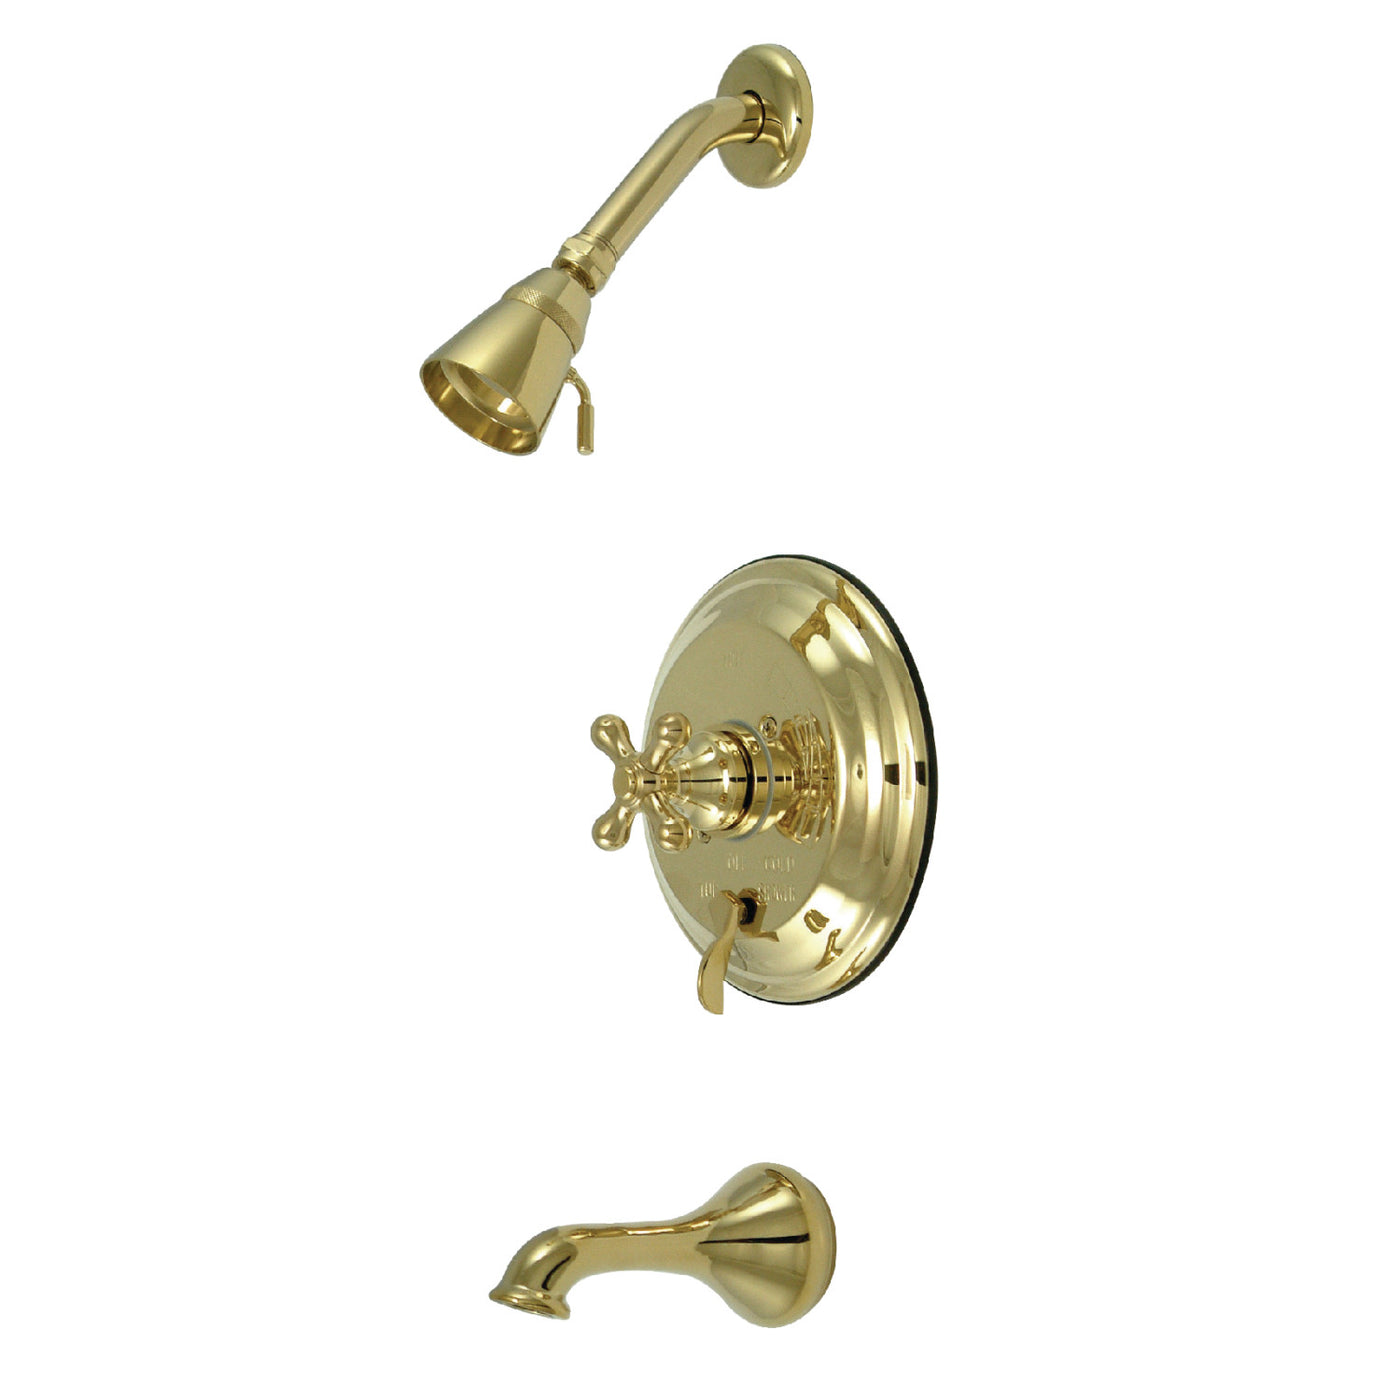 Elements of Design EB36320AX Tub and Shower Faucet, Polished Brass